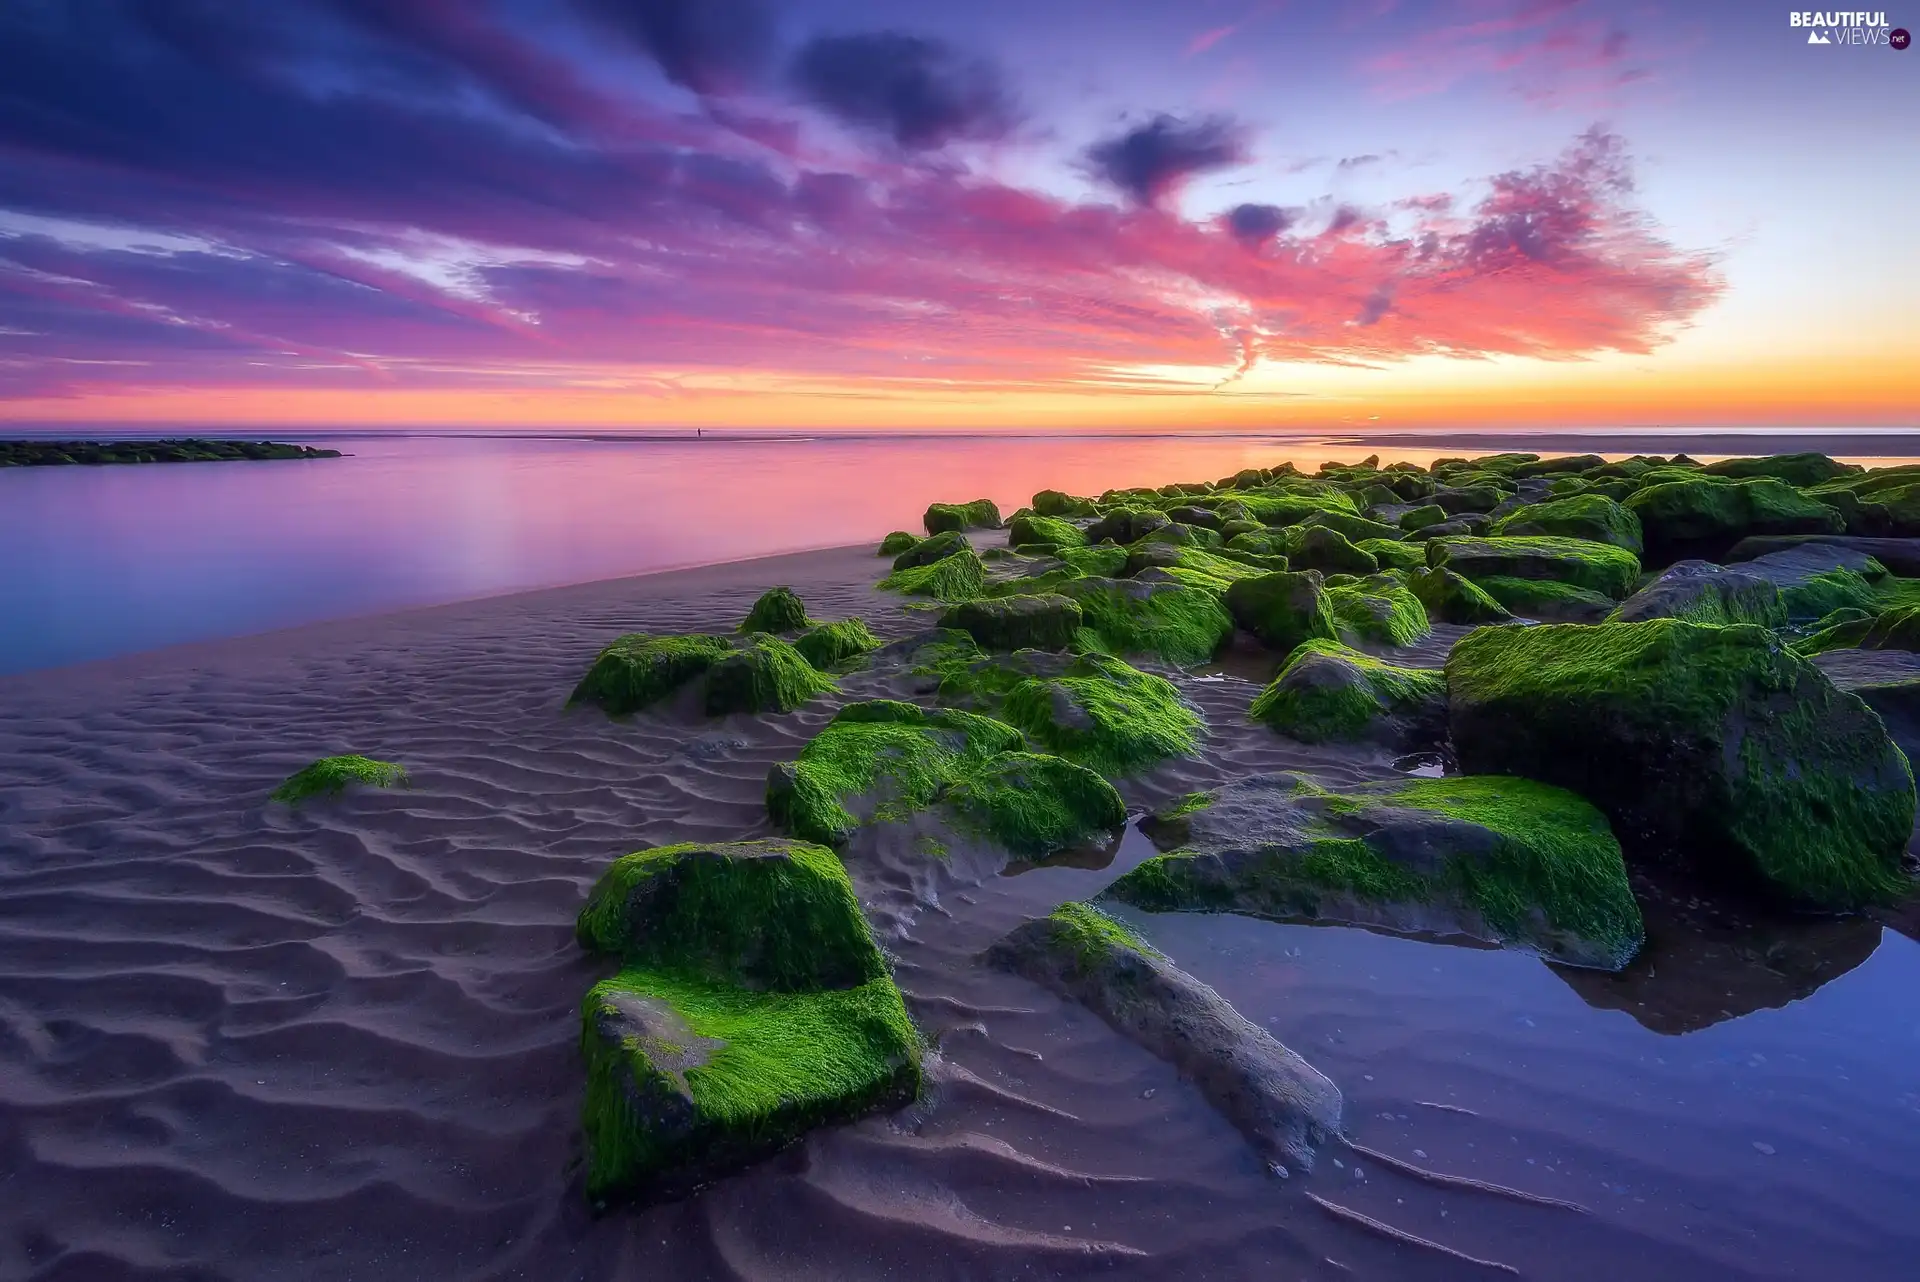 clouds, Beaches, Netherlands, mossy, Katwijk City, Great Sunsets, sea, Stones